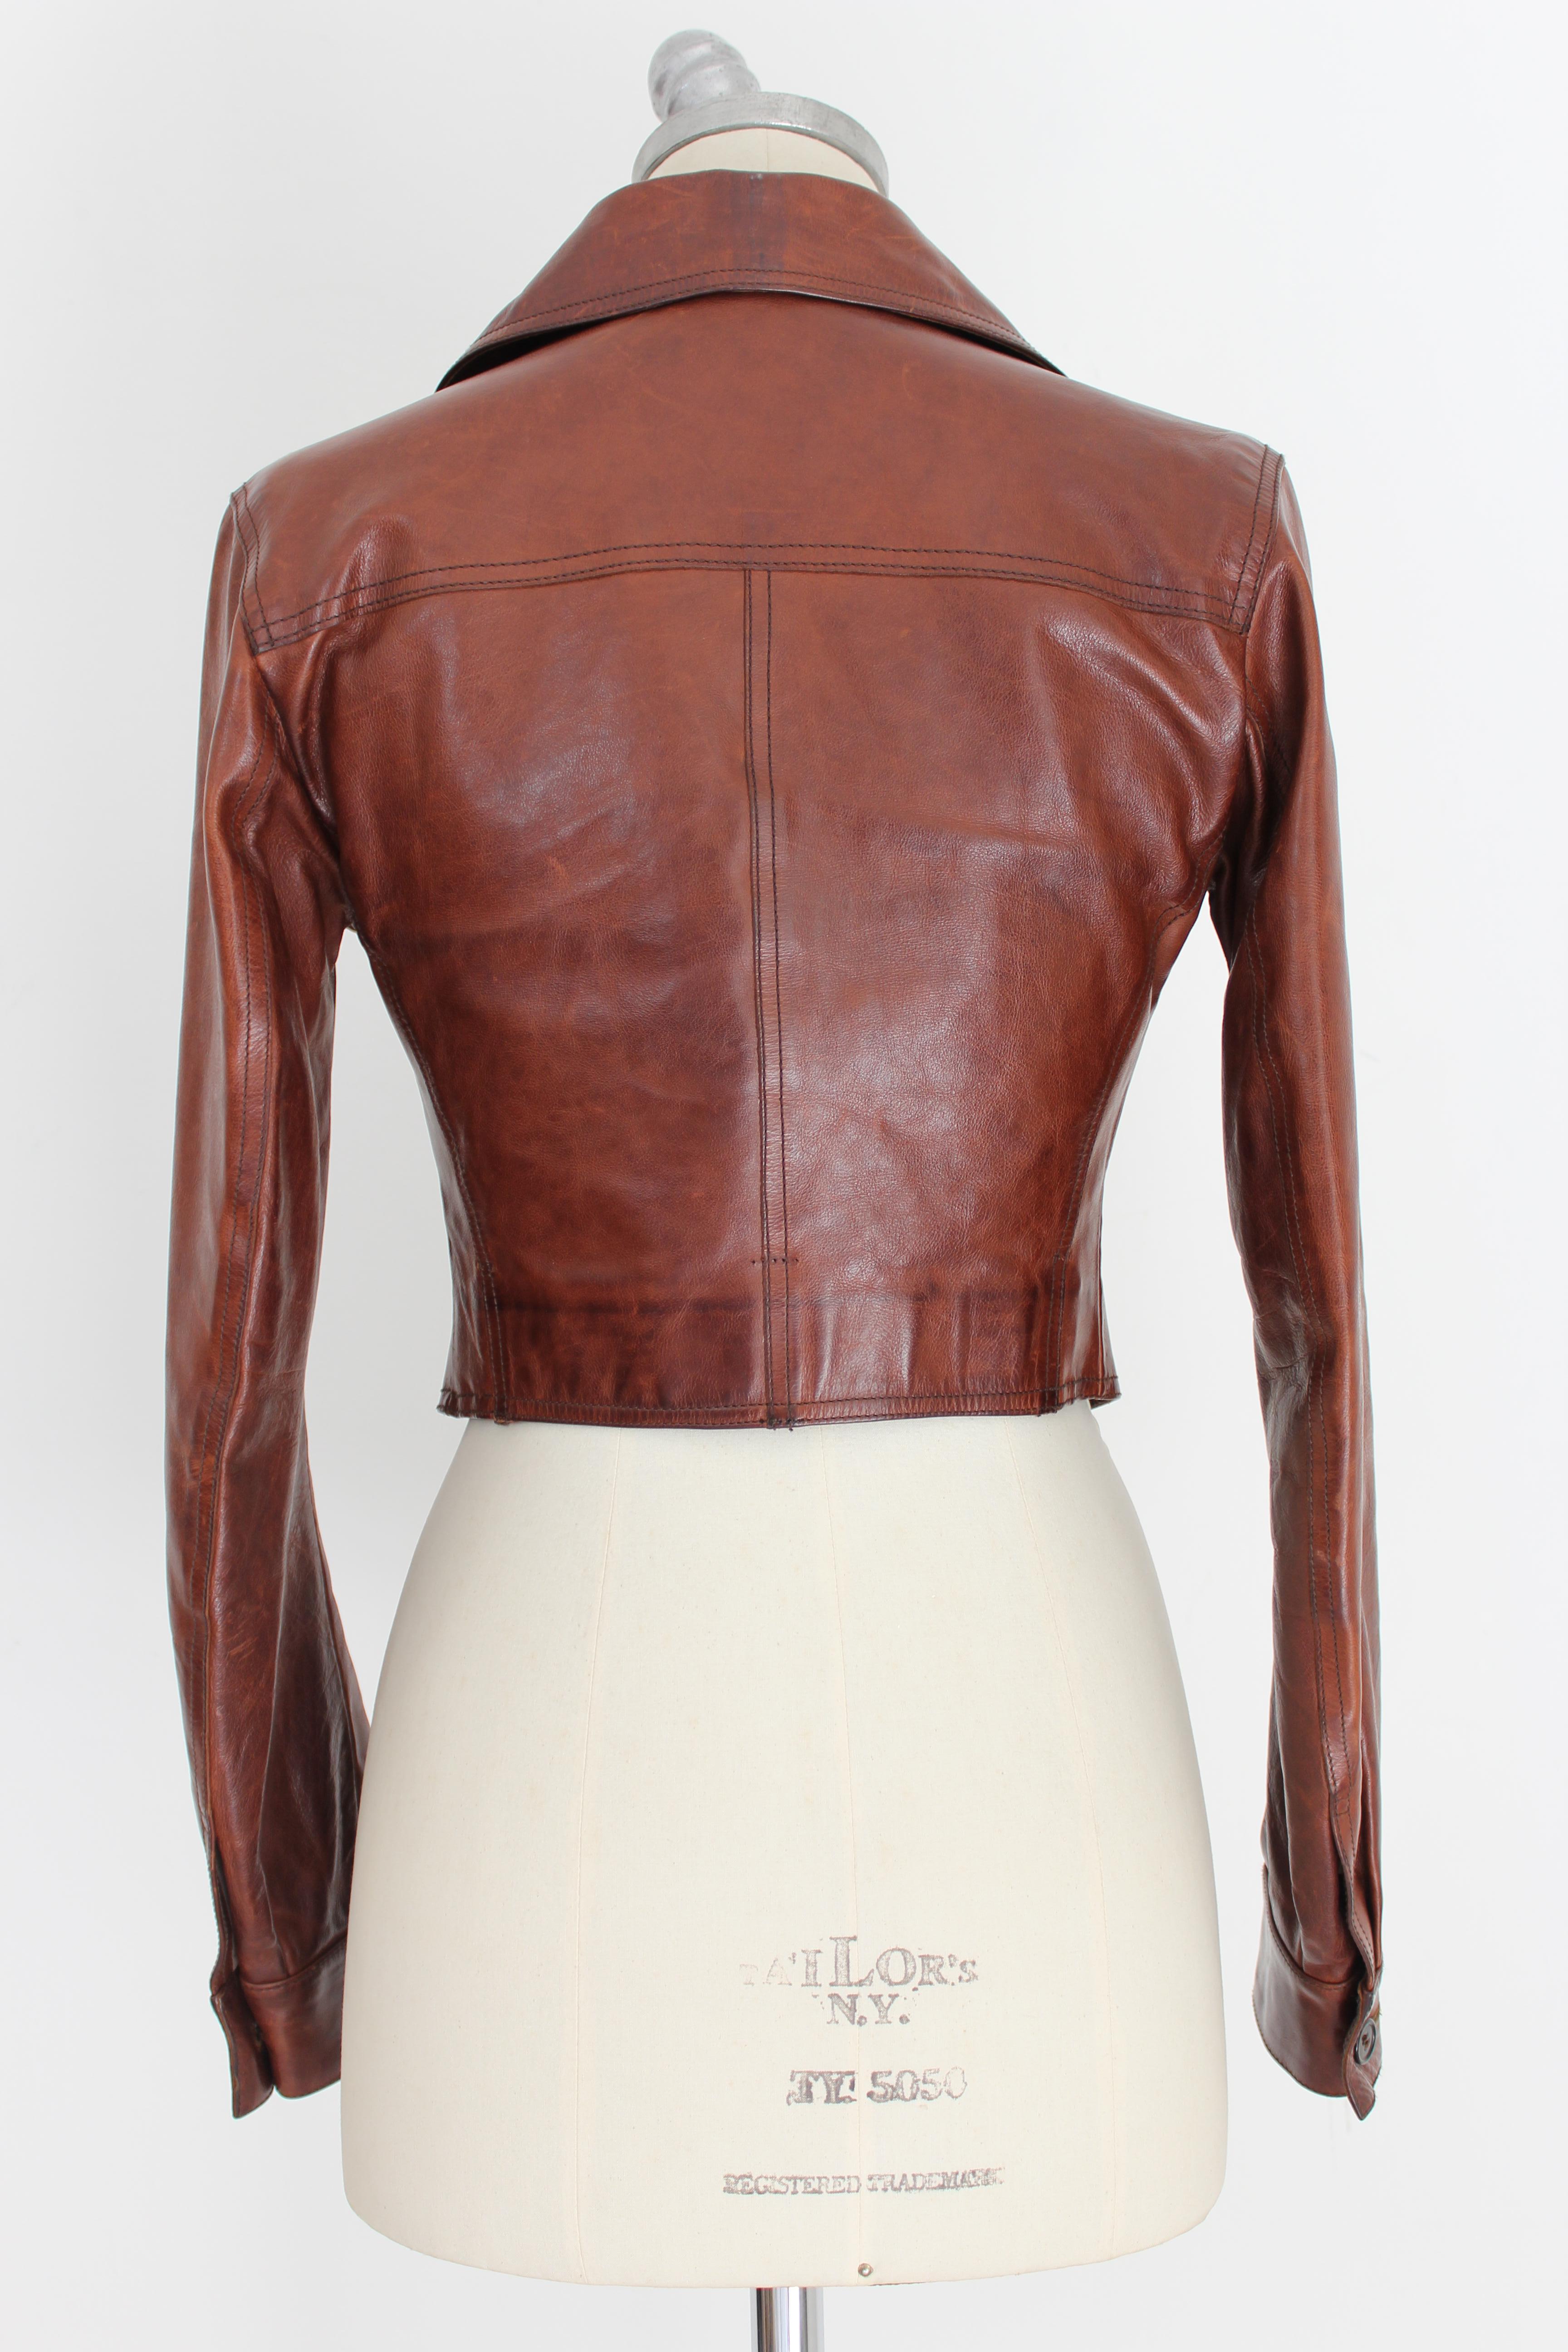 Prada cropped  jacket women's 2000s. Waist  model, brown, 100% leather. Wide collar, button closure, two chest pockets. Made in Italy. Excellent vintage condition. 

Size: 42 It 8 Us 10 Uk 

Shoulder: 42 cm
Bust/Chest: 42 cm 
Sleeve: 59 cm 
Length: